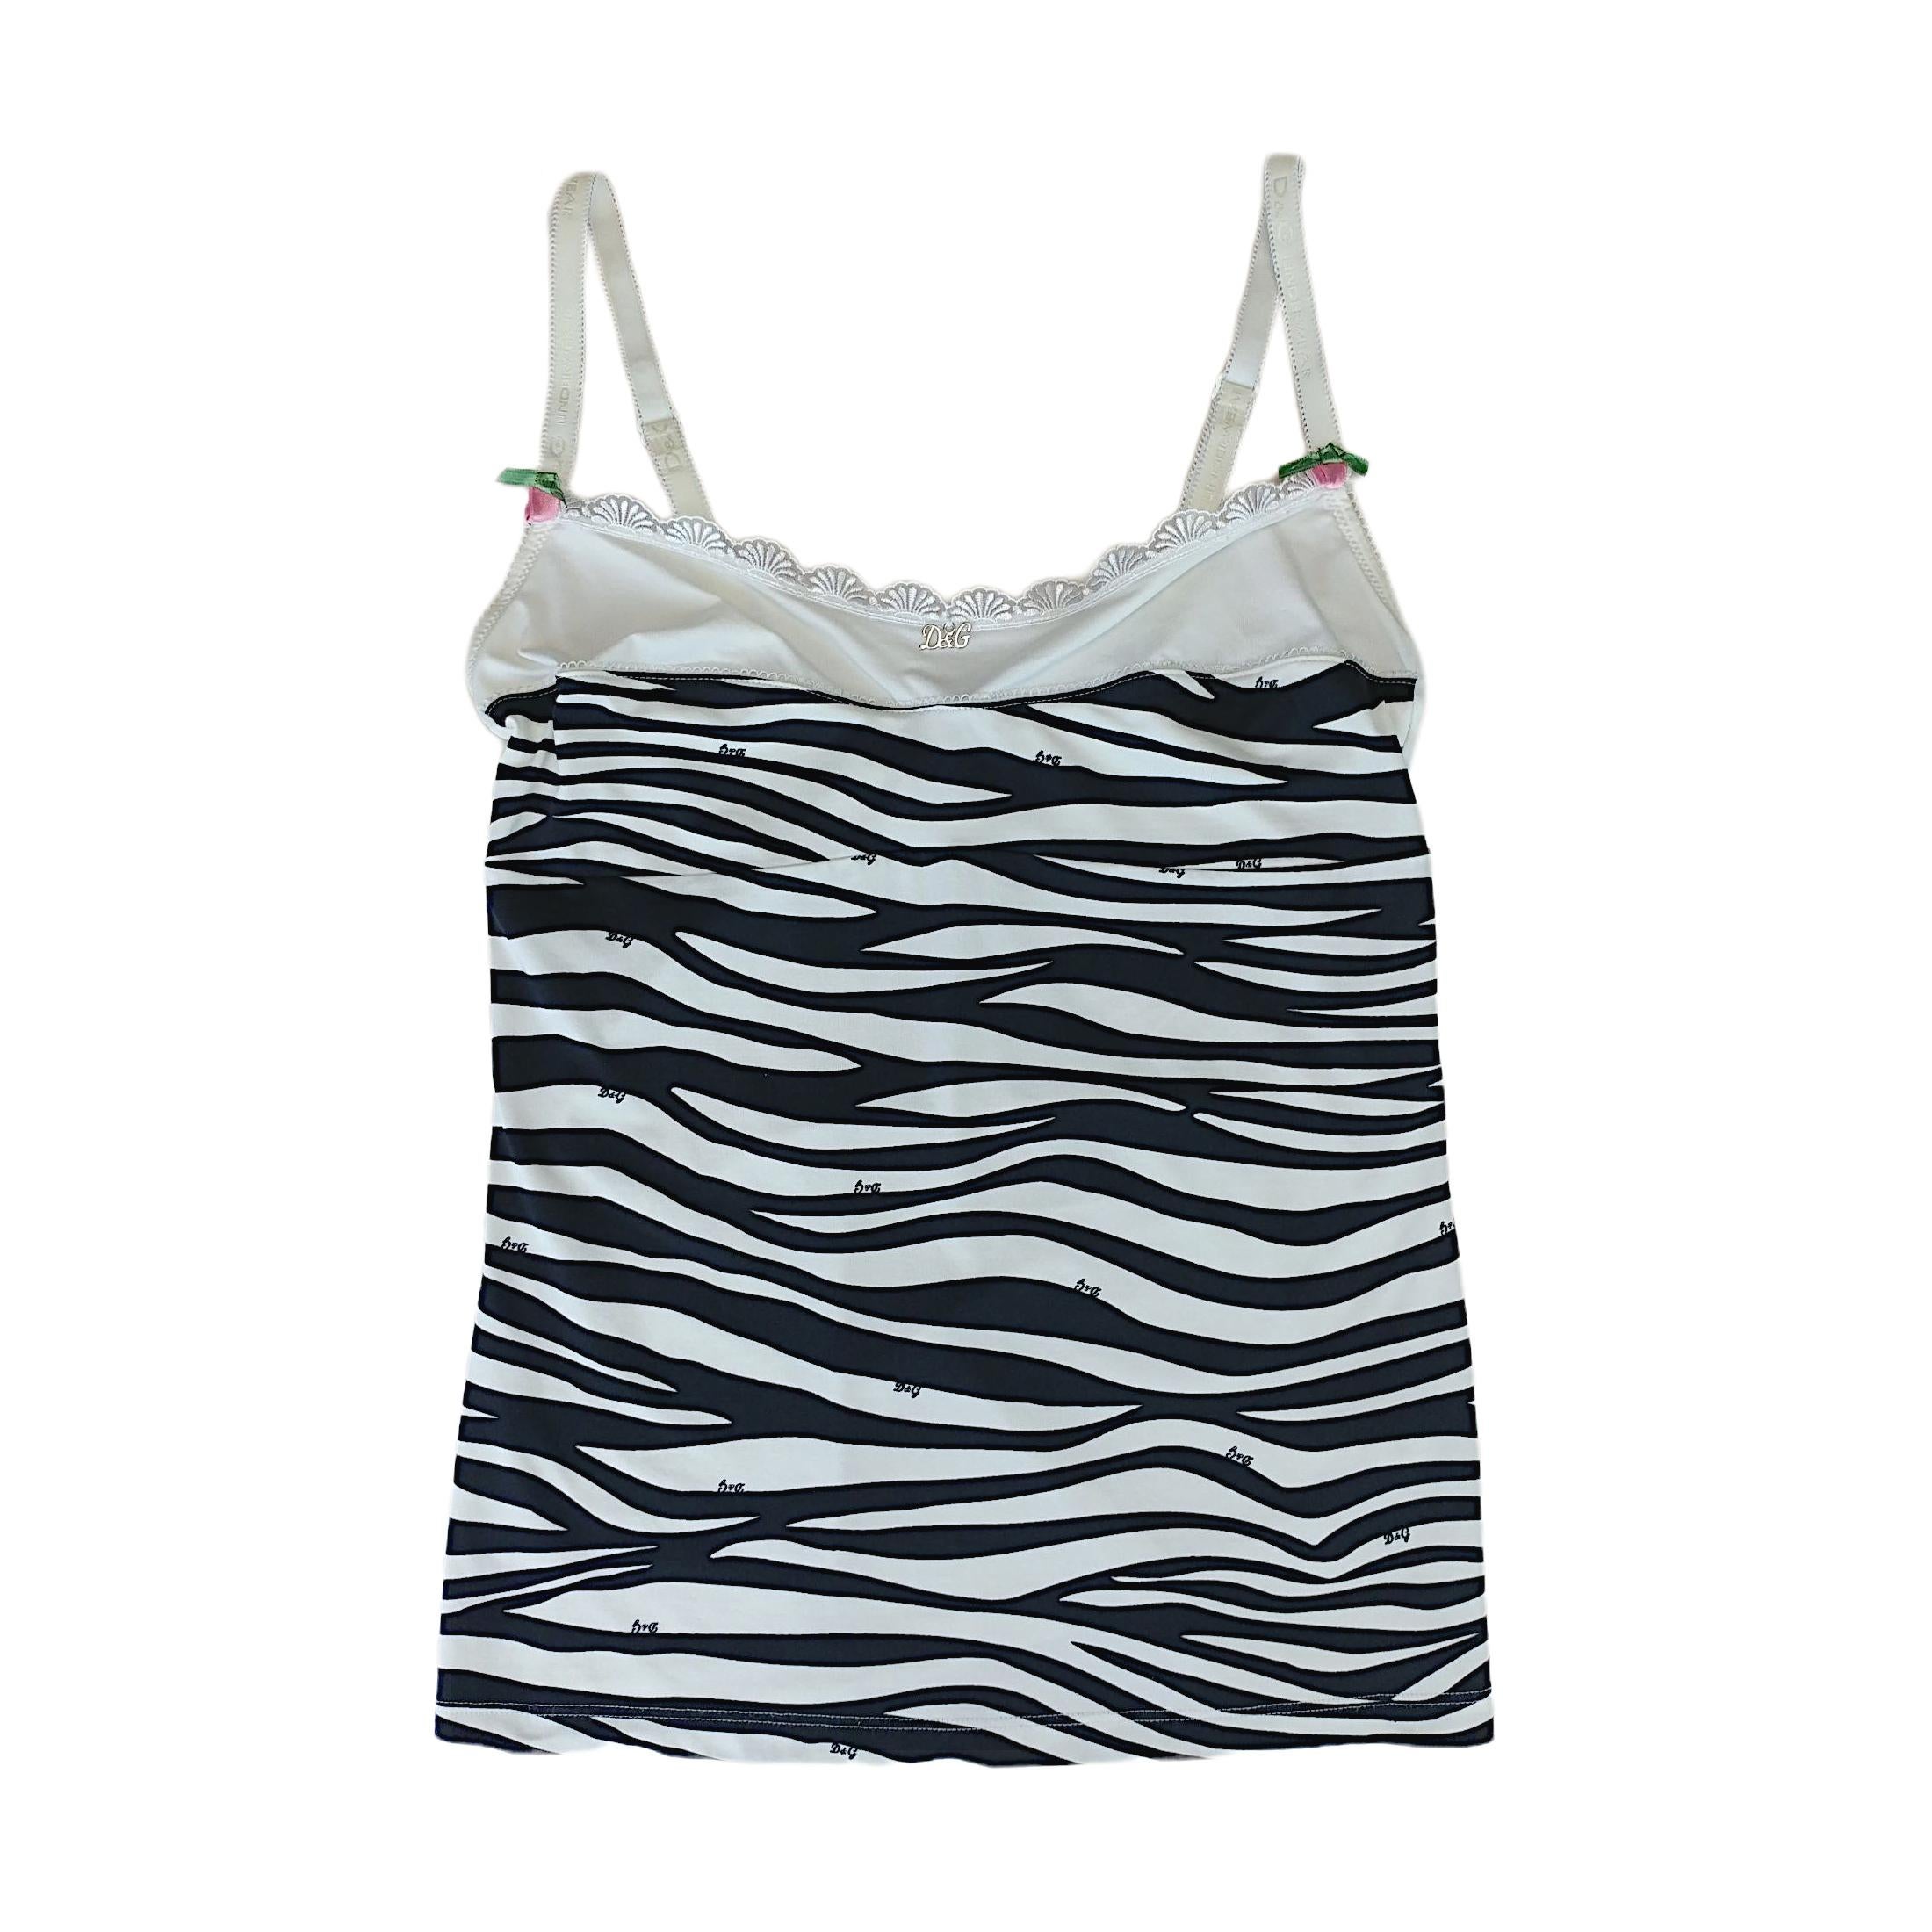 This tank top is an iconic example of the animalier style pursued by Dolce & Gabbana over the years. It is in very good vintage conditions, with two small roses on the straps and the authenticity hologram well